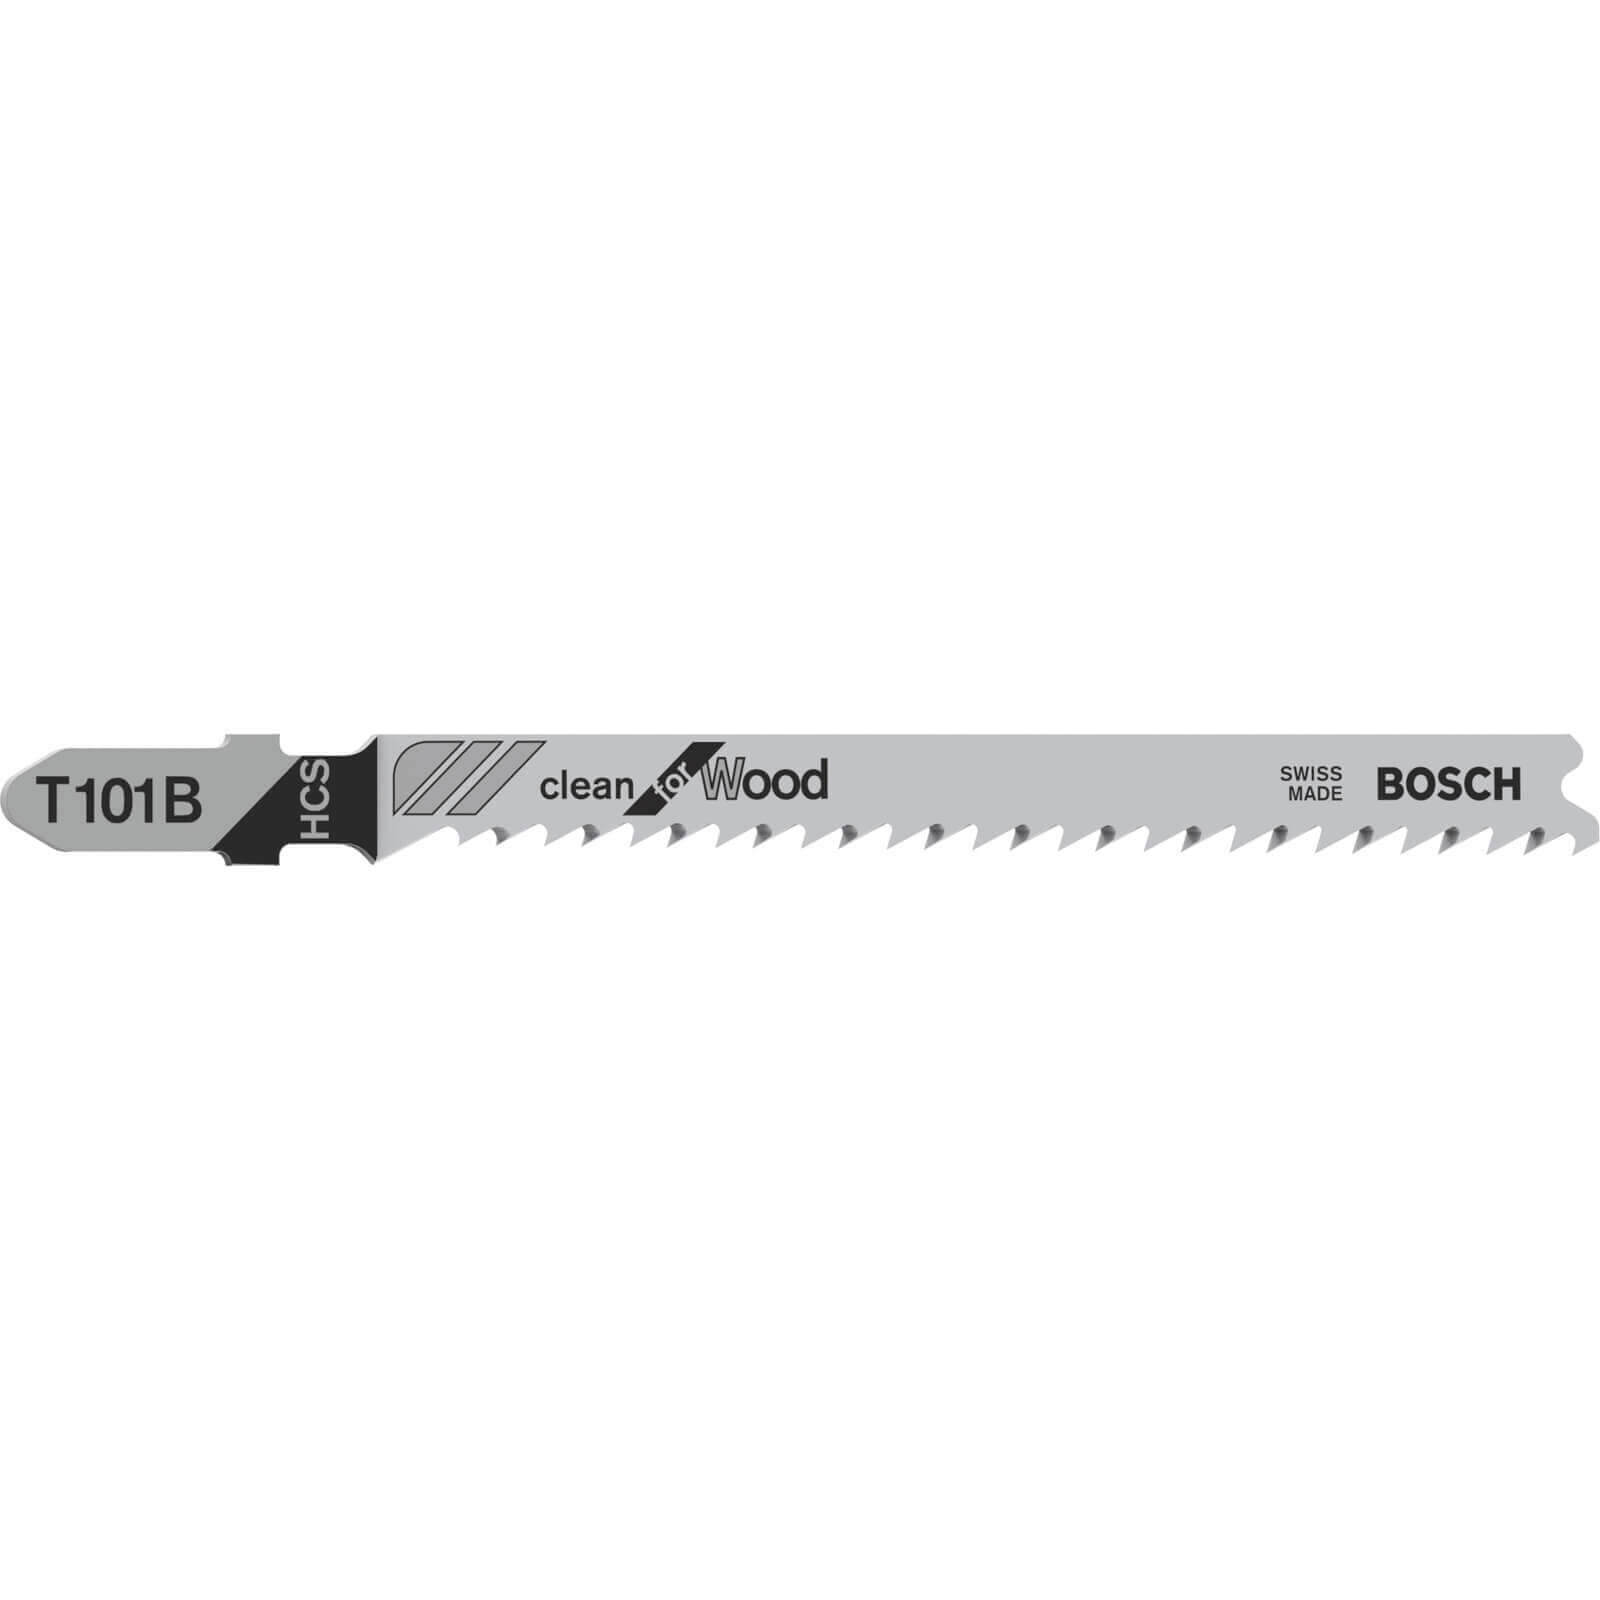 Image of Bosch T101 B Wood Cutting Jigsaw Blades Pack of 3